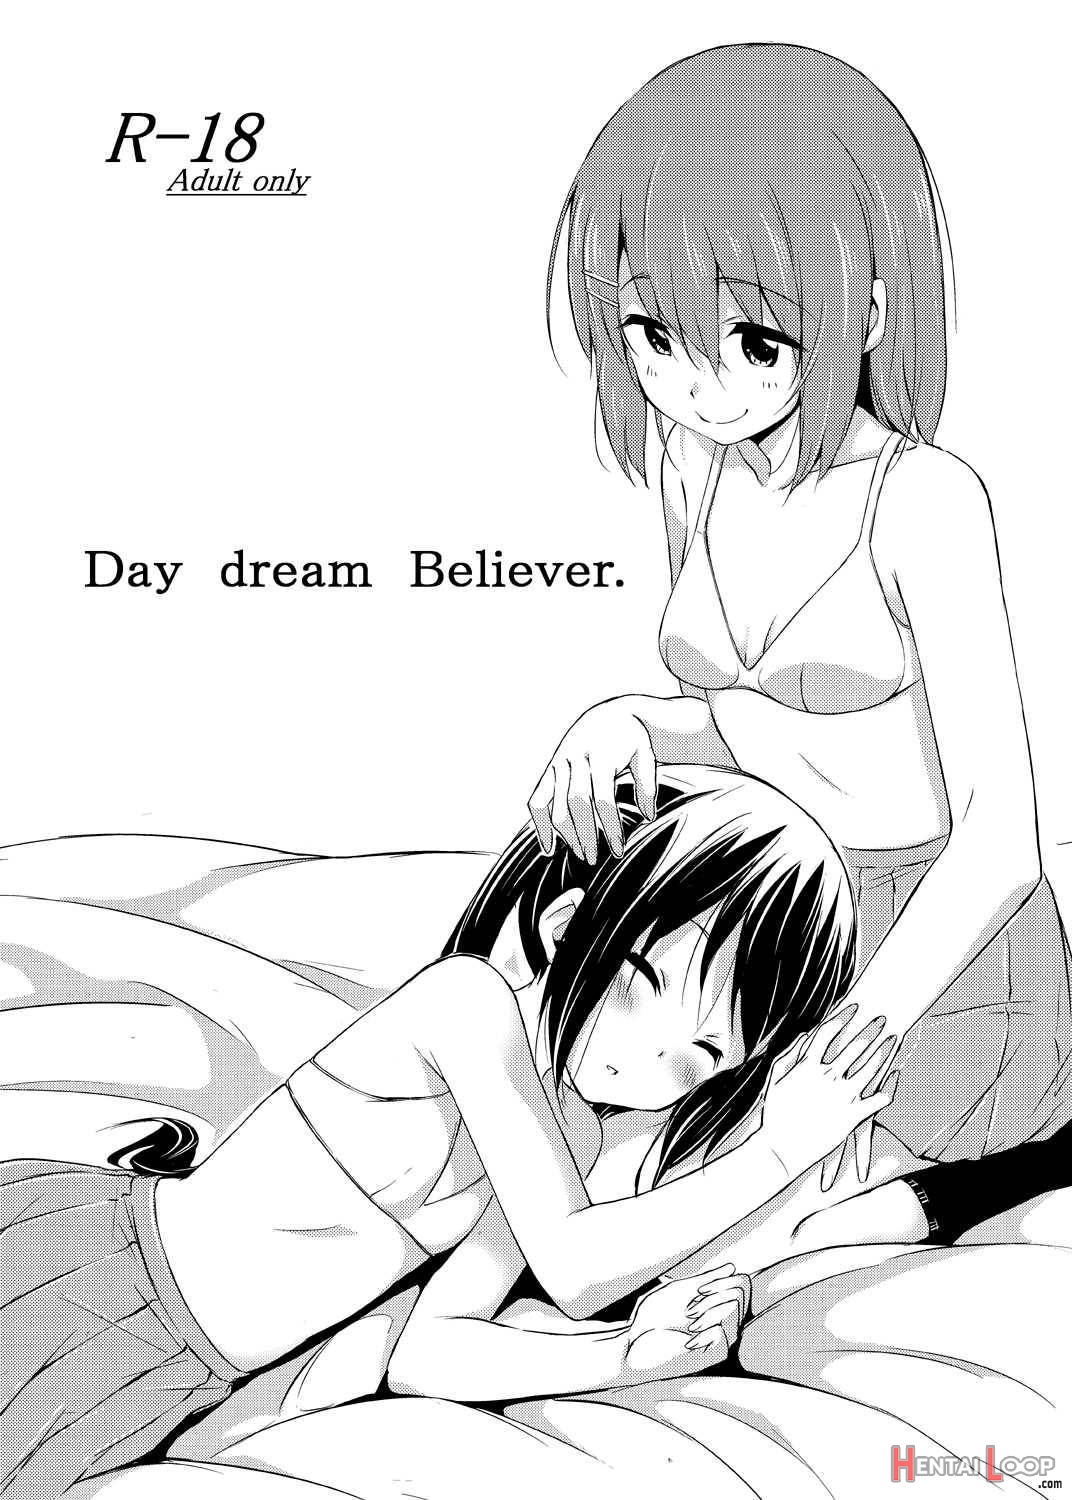 Day dream Believer. page 1